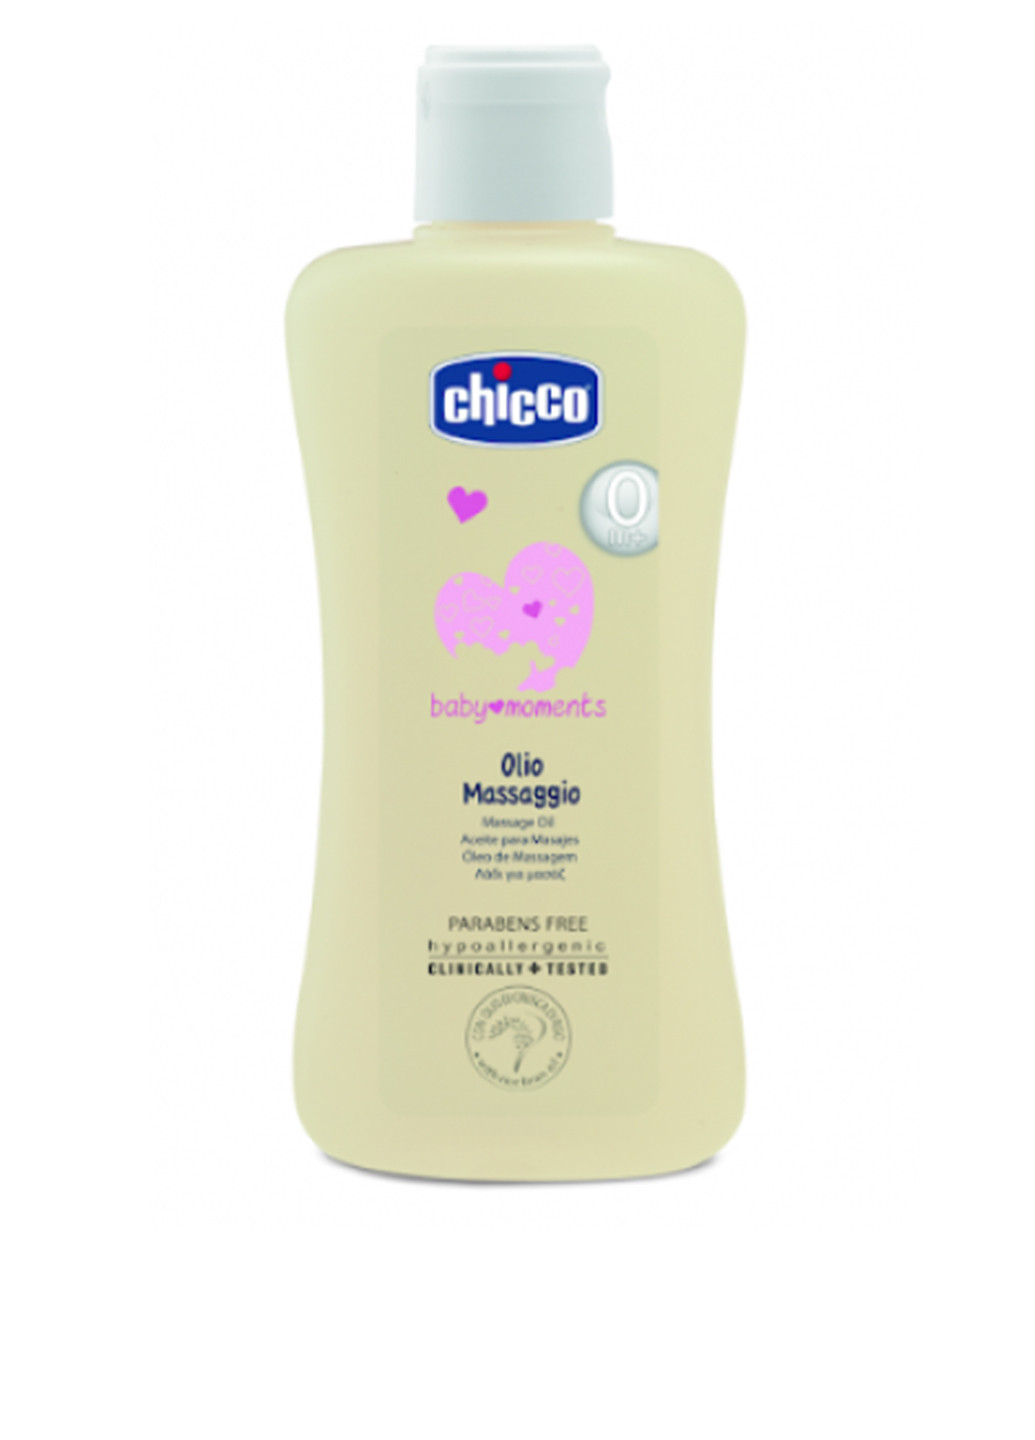 Масло для массажа Baby Moments, 200 мл Chicco (138464966)